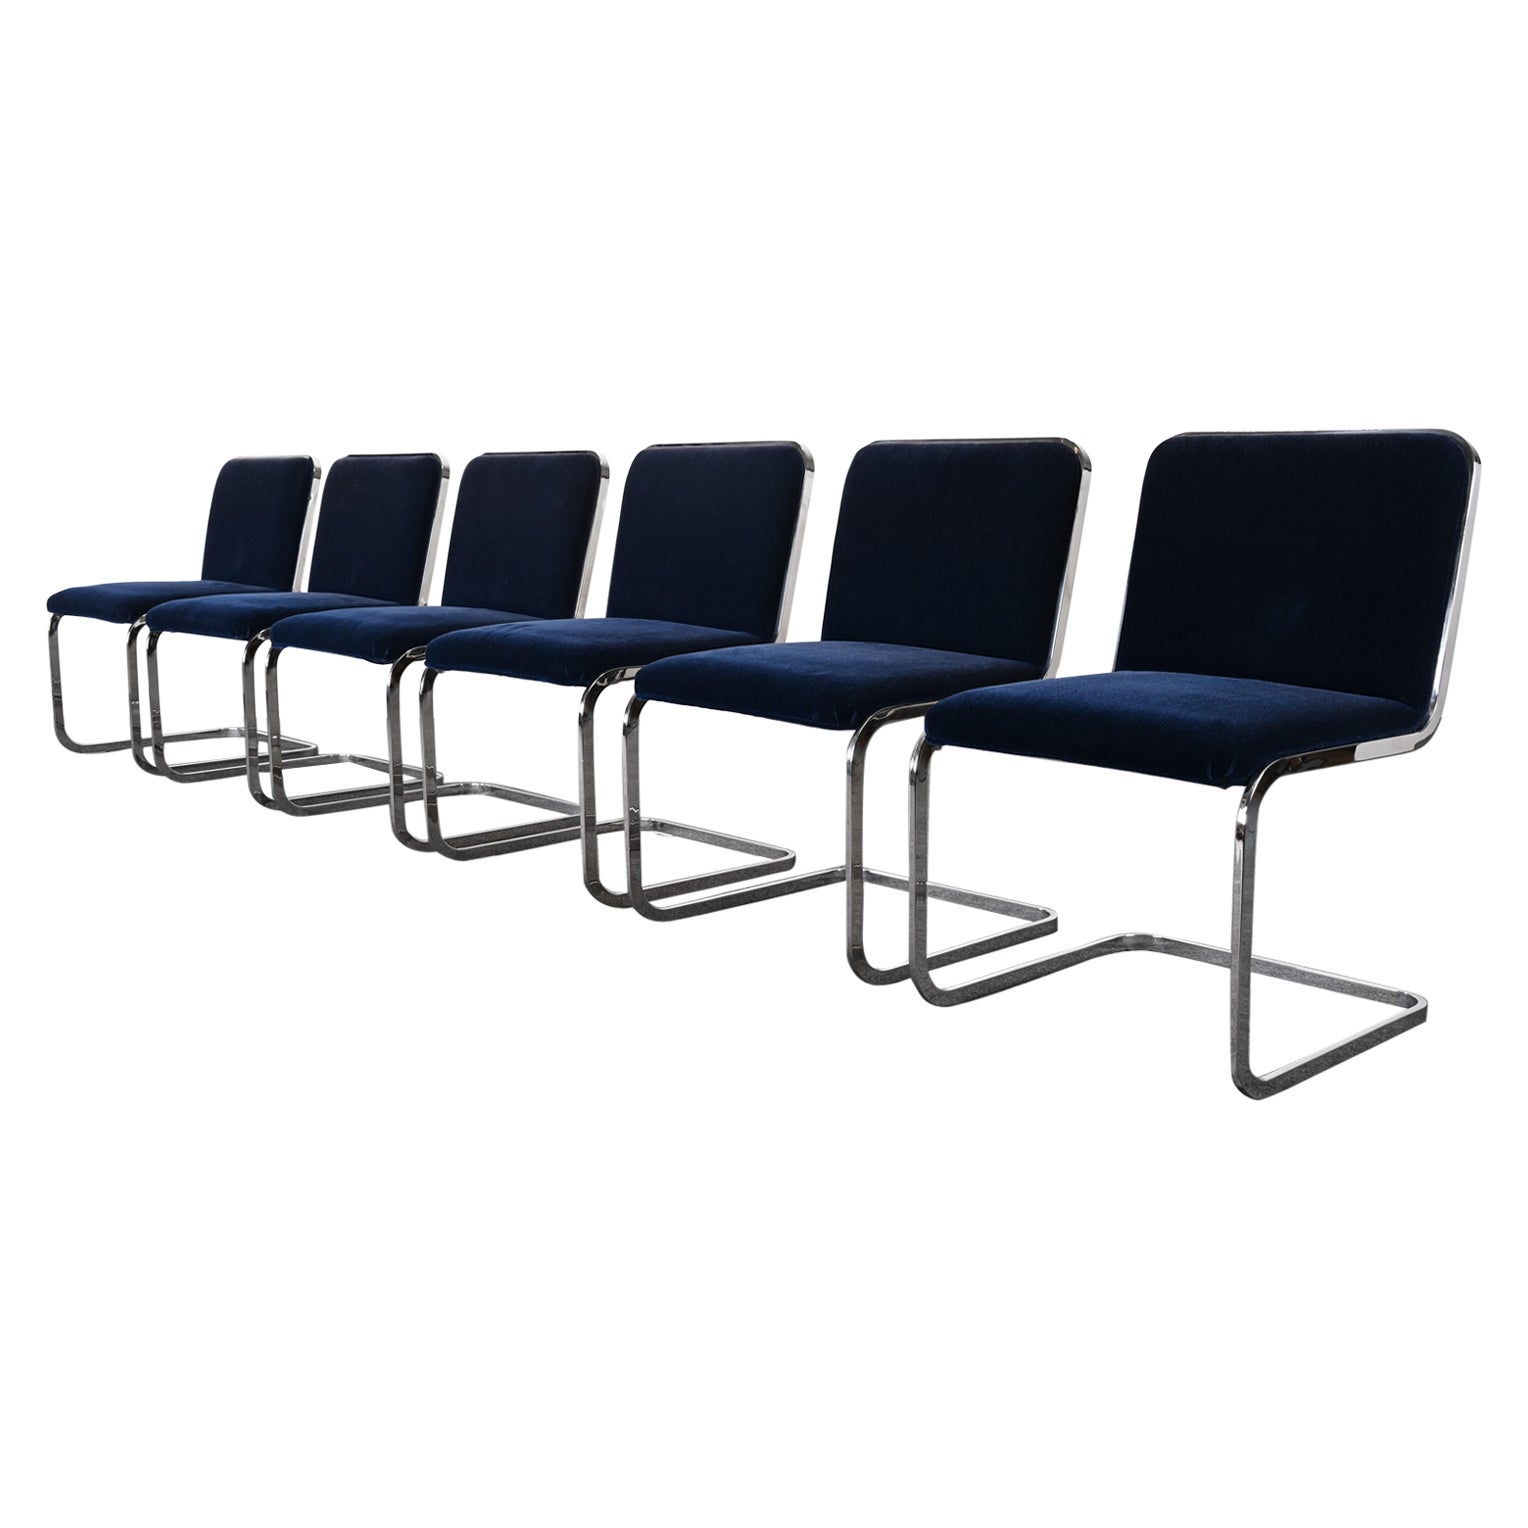 Set of Six Stainless Steel Cantilever Dining Chairs by Brueton, 1980s